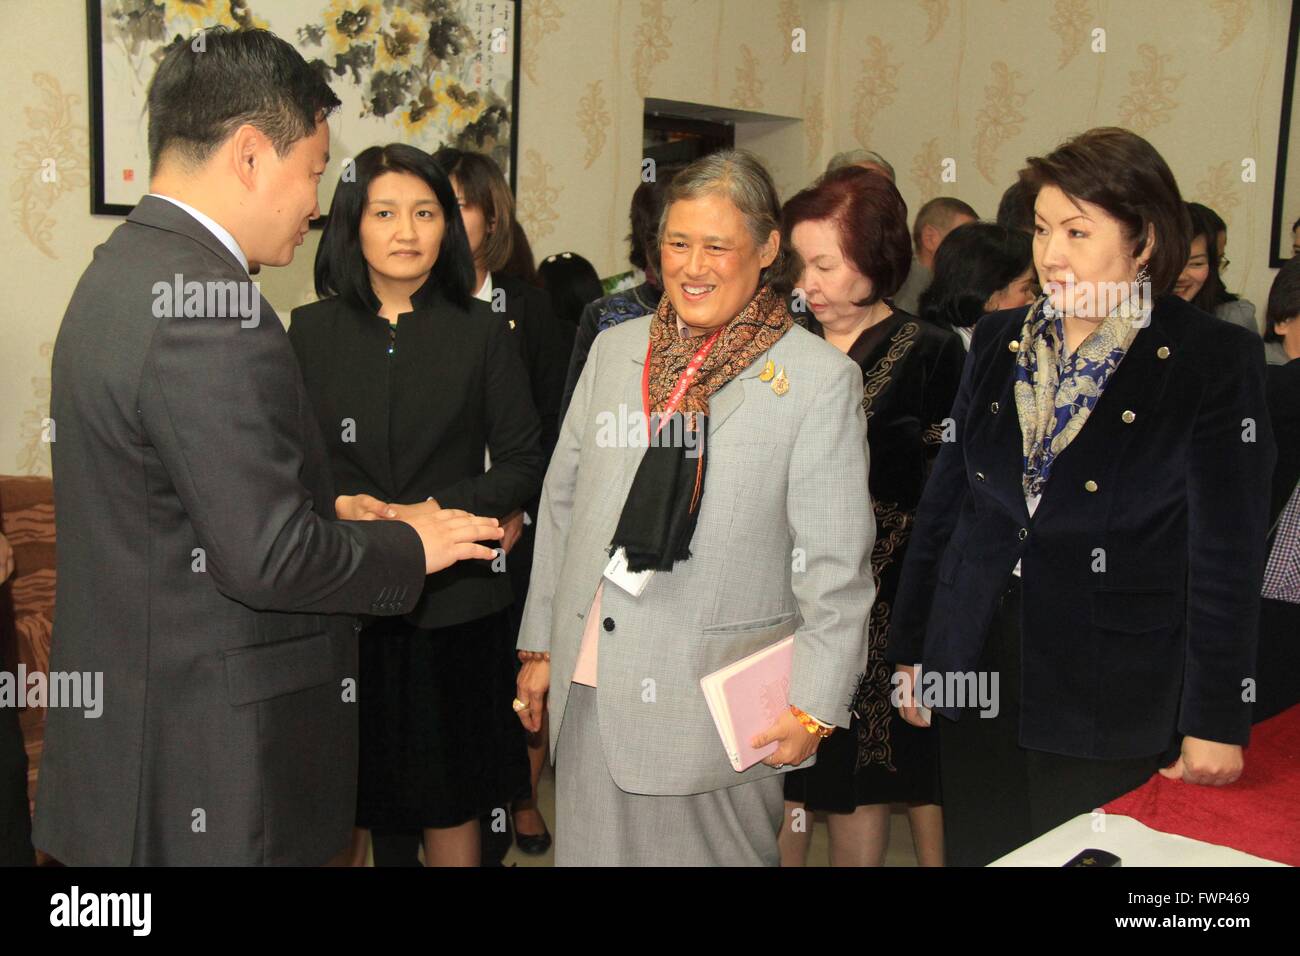 Bishkek. 7th Apr, 2016. Thai Crown Princess Maha Chakri Sirindhorn (C) visits the Confucius Institute in Bishkek, Kyrgyzstan, on April 7, 2016. Thai crown princess Maha Chakri Sirindhorn visited on April 7 the Confucius Institute of Kyrgyz National University during her first visit to Kyrgyzstan. In the Confucius Institute, the Thai princess talked in Chinese with students and teachers, wrote in Chinese calligraphy 'Knowledge is infinite' and even recited the Chinese poetry 'Quiet Night Thoughts' of the famous ancient Chinese poet Li Bai. Credit:  Xinhua/Alamy Live News Stock Photo